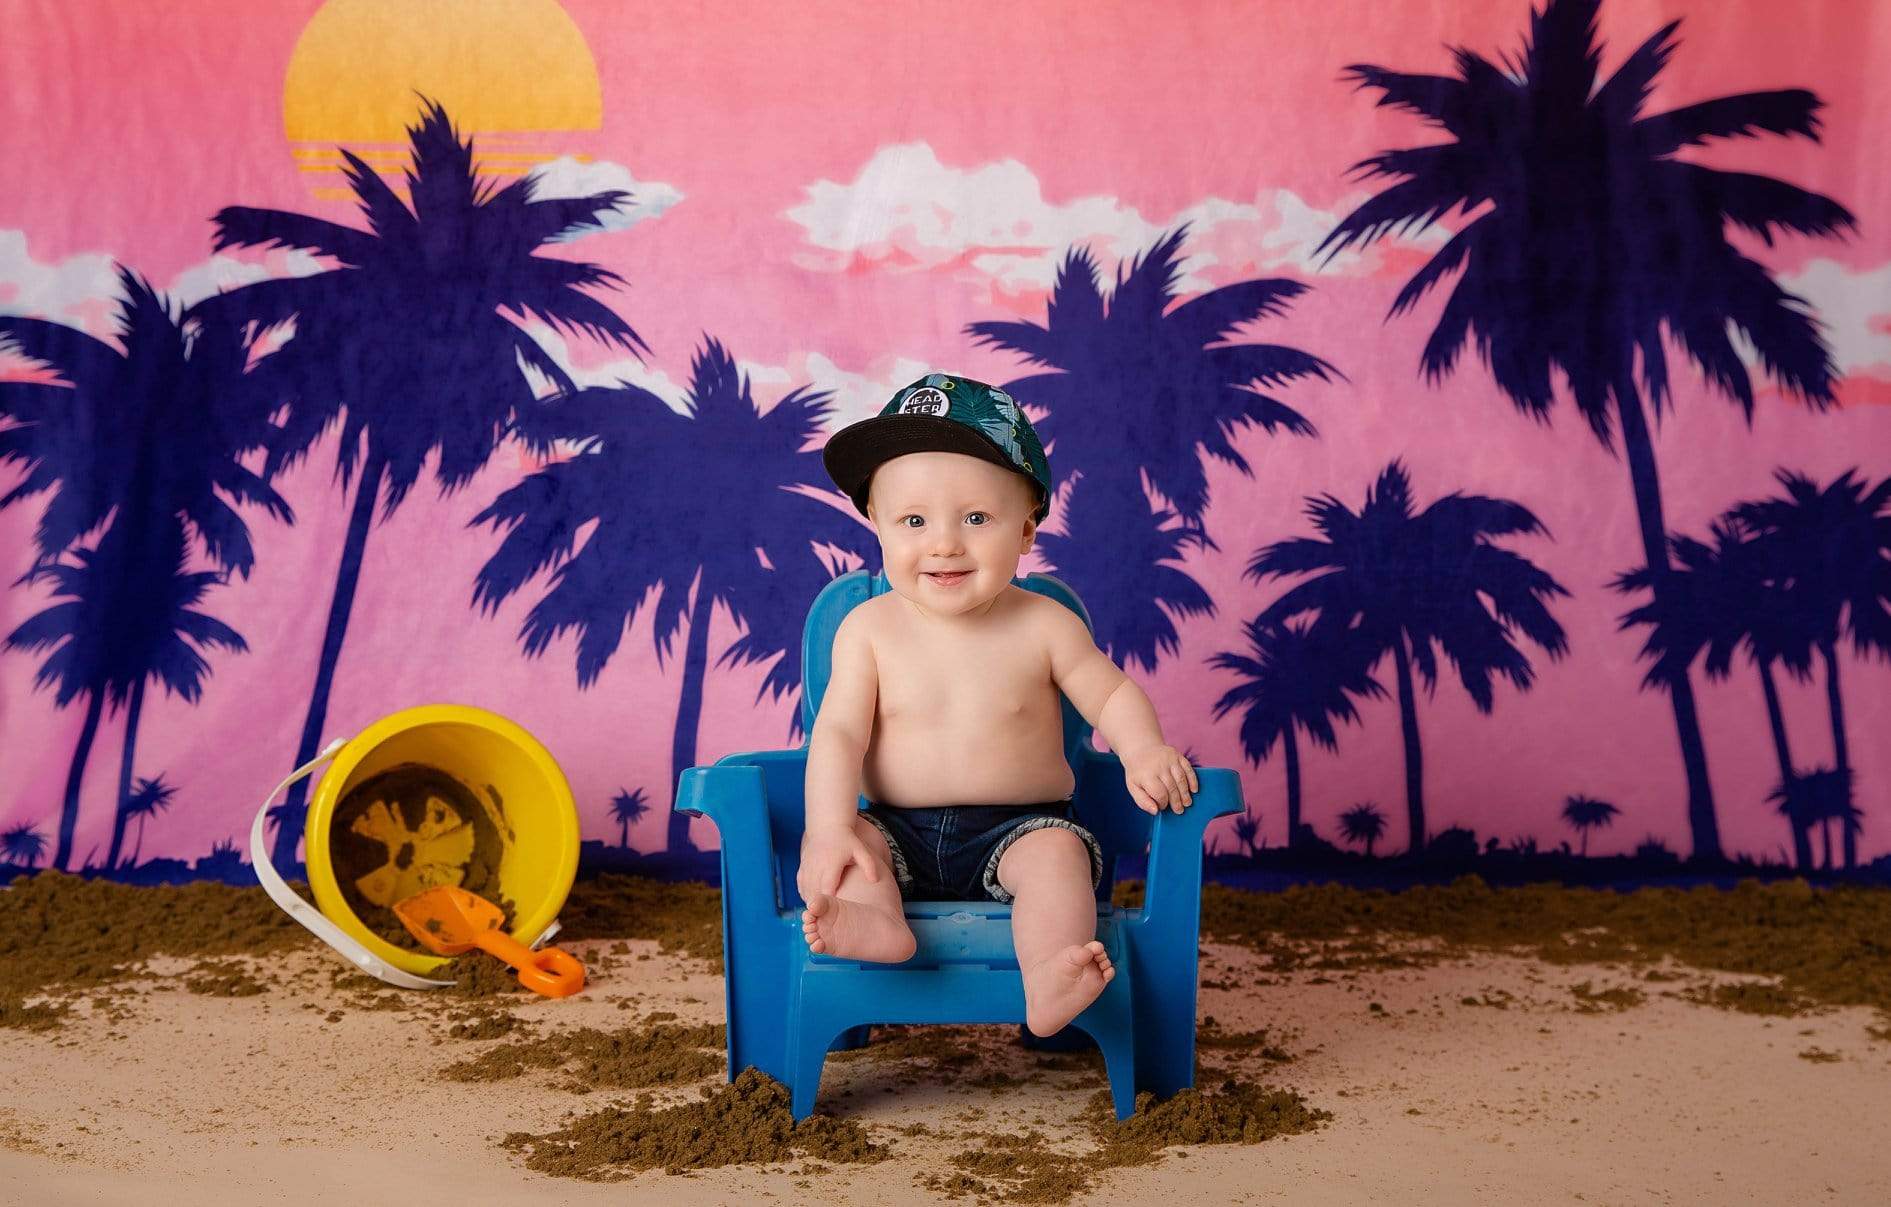 Katebackdrop：Kate Summer Sunset by the Sea Coconut Tree Backdrop for Photography Designed by JFCC